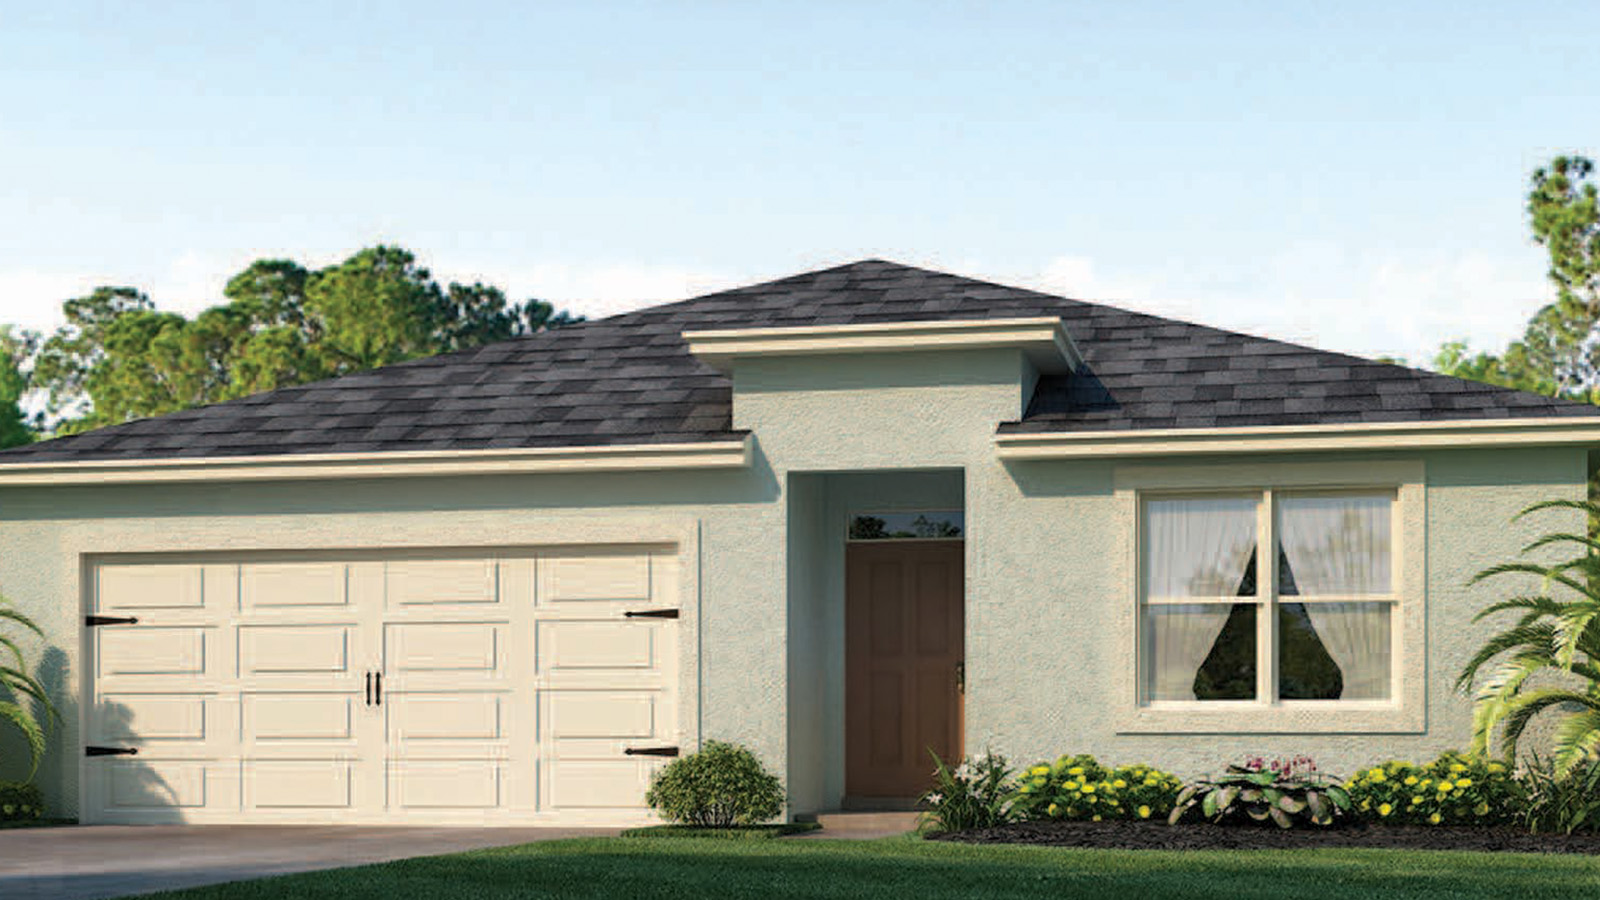 Exterior image of single family home